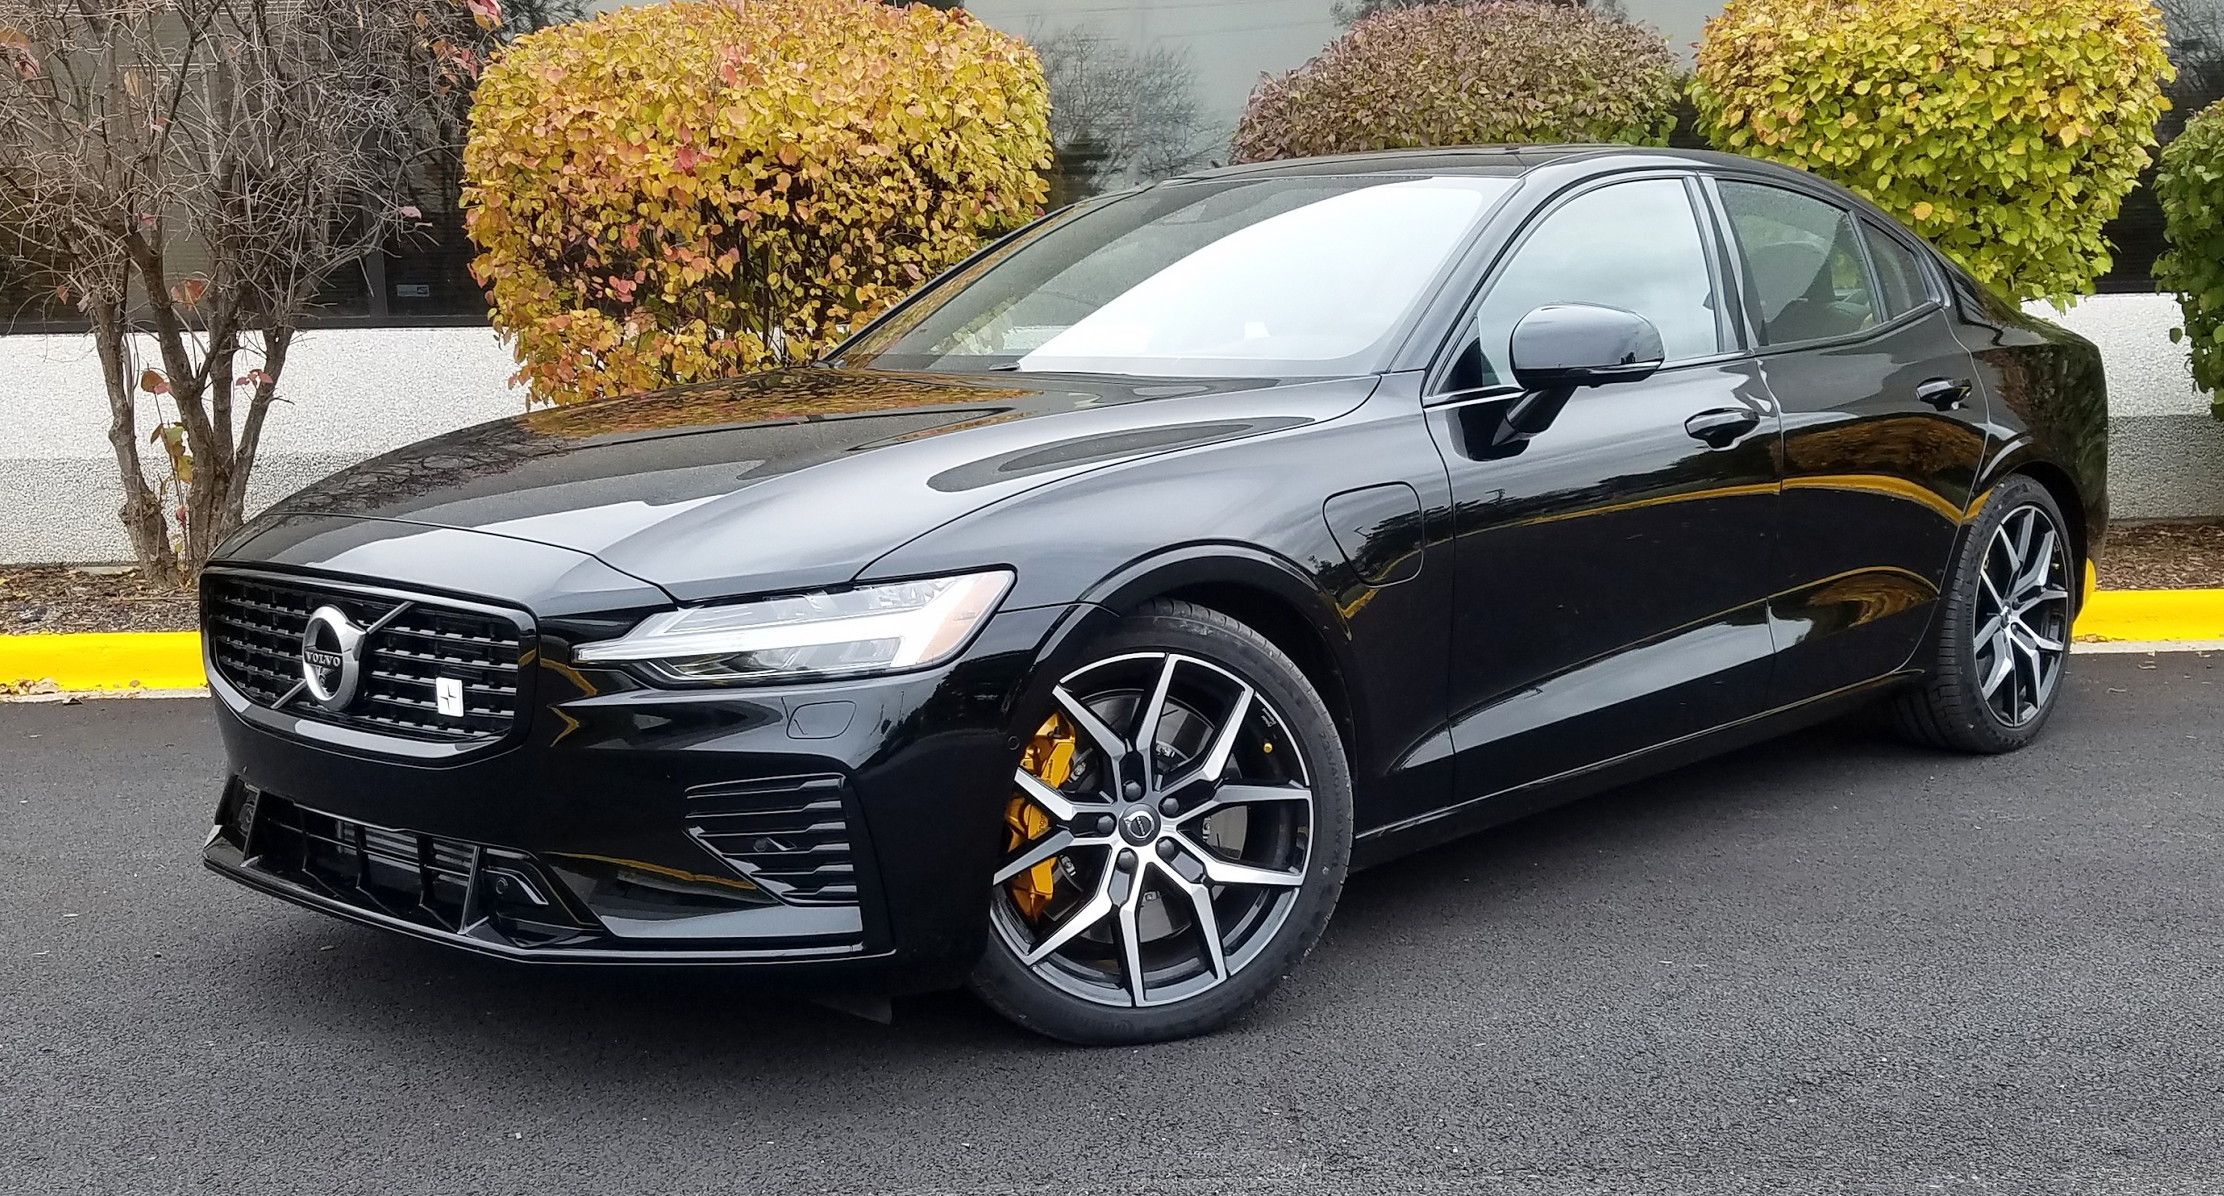 Test Drive: 2019 Volvo S60 T8 Polestar | The Daily Drive | Consumer Guide®  The Daily Drive | Consumer Guide®